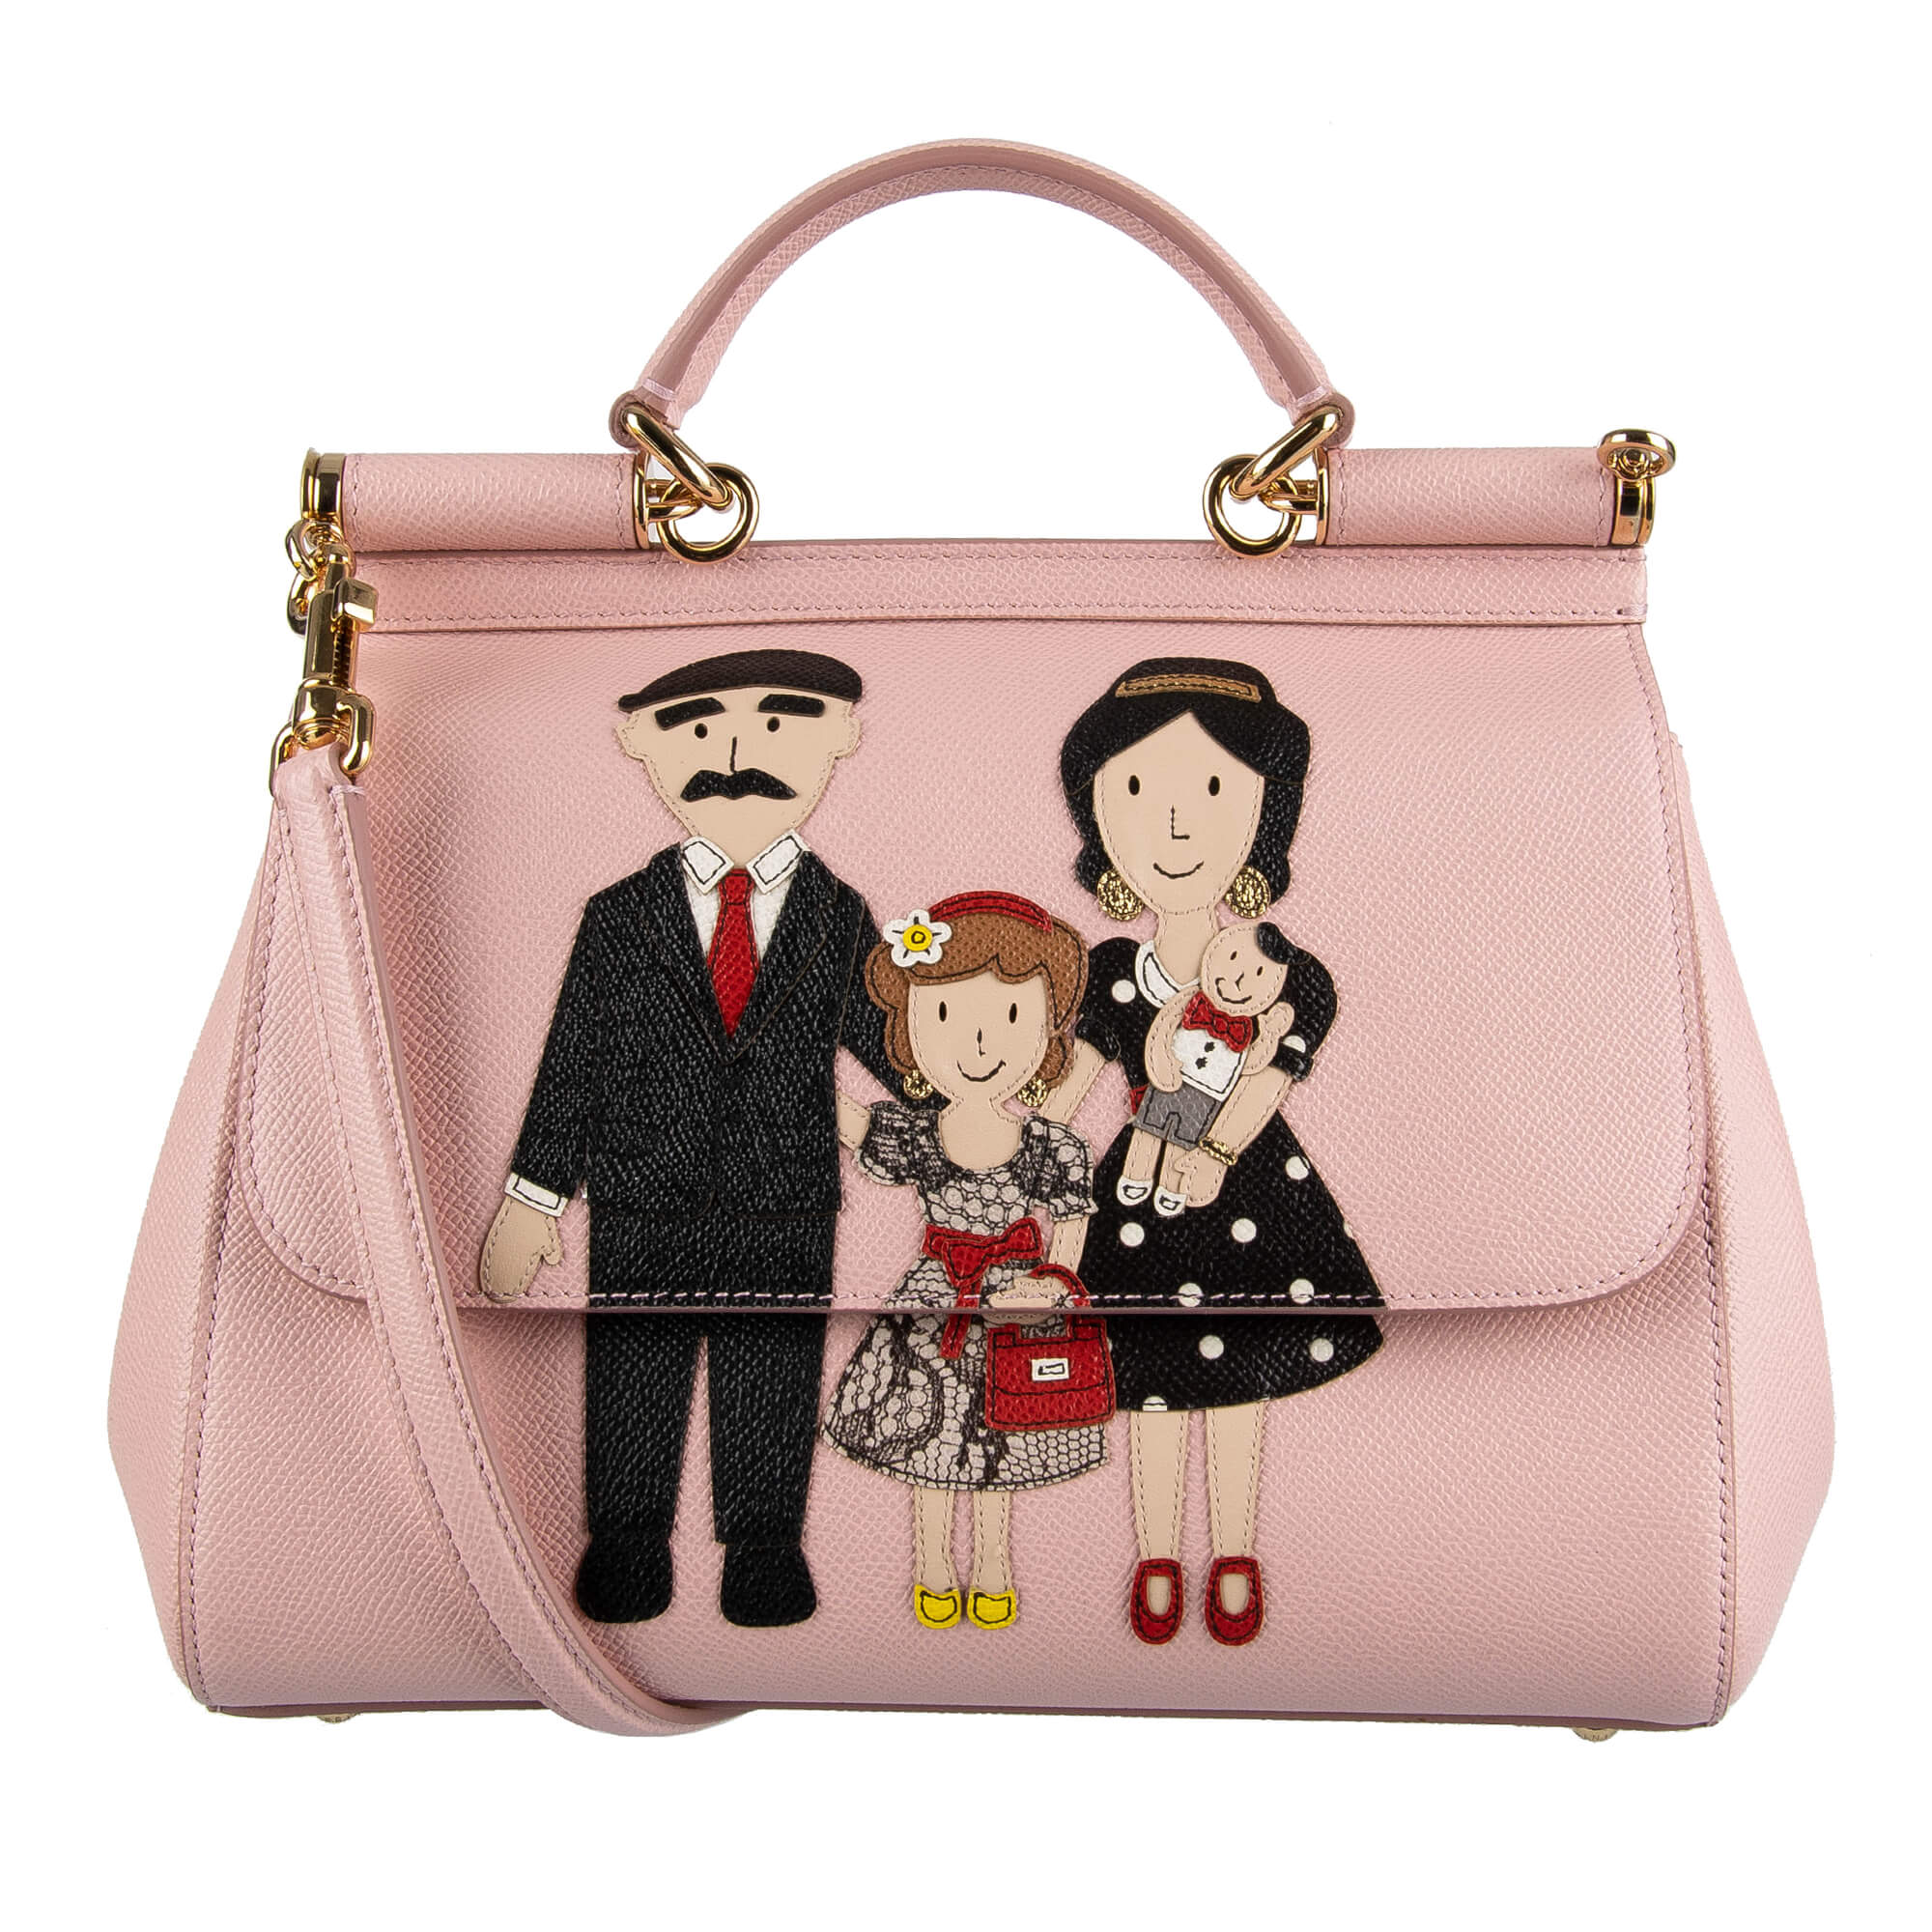 dolce gabbana family collection